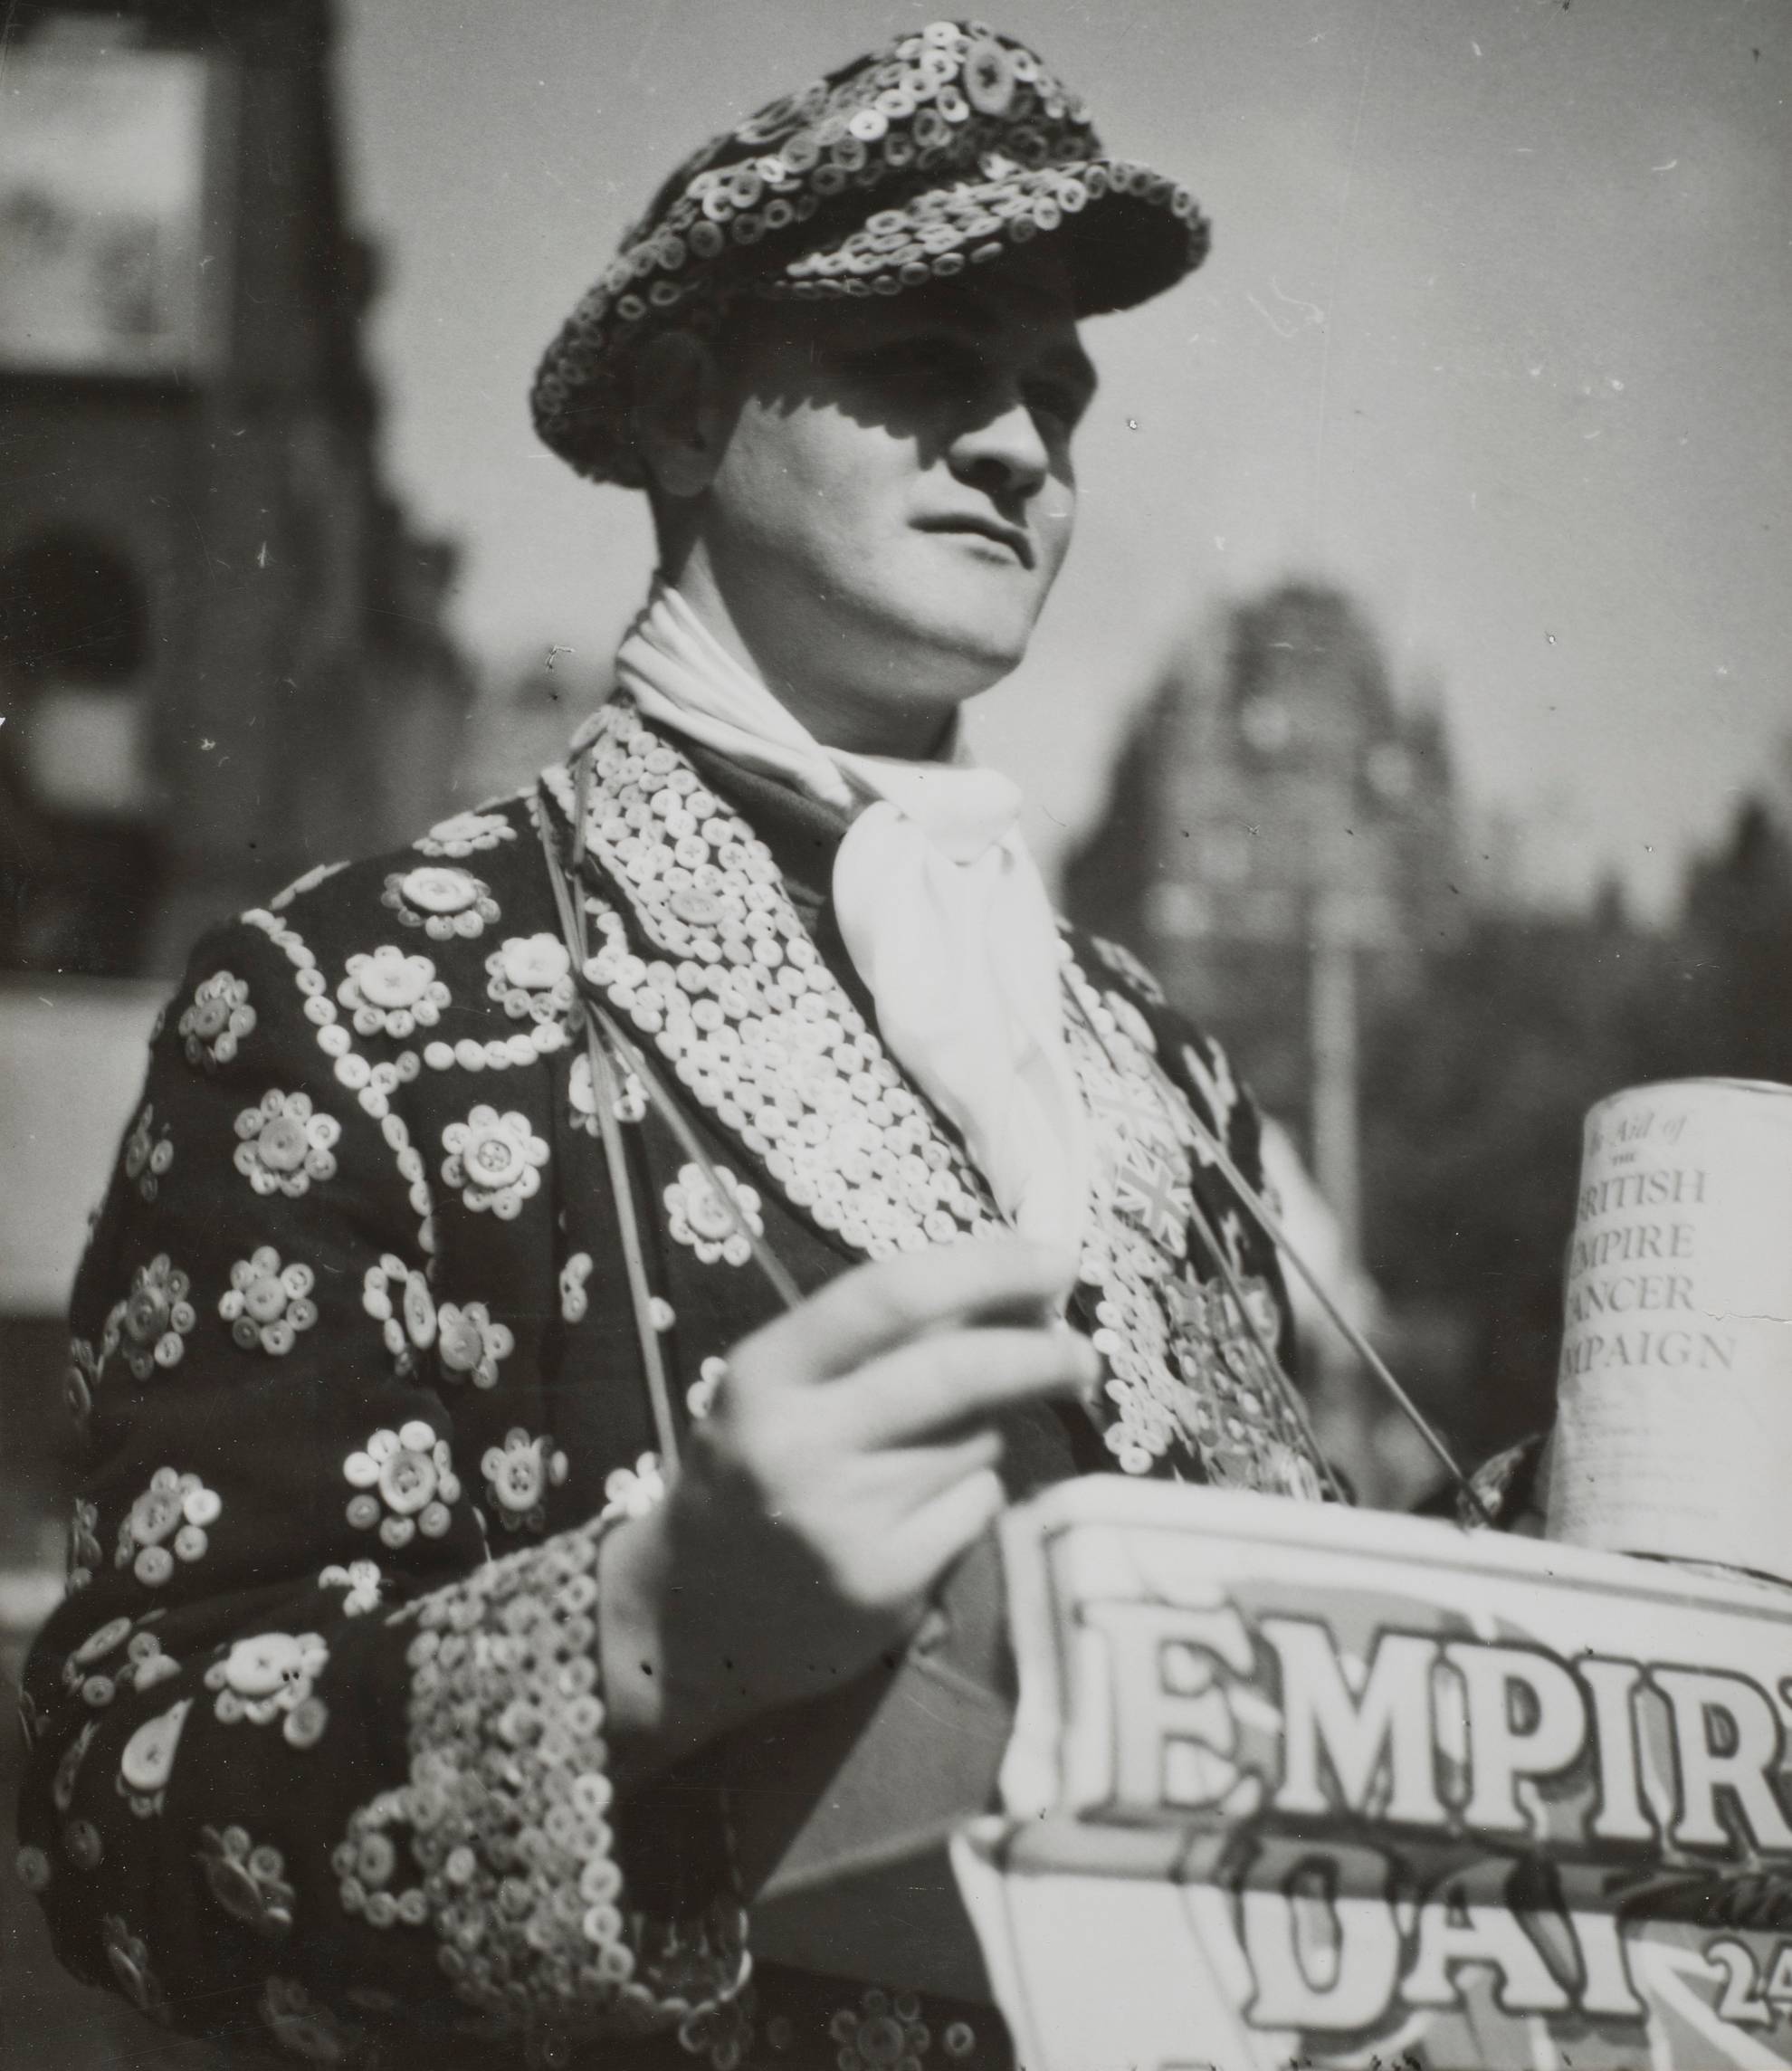 Pearly King photograph